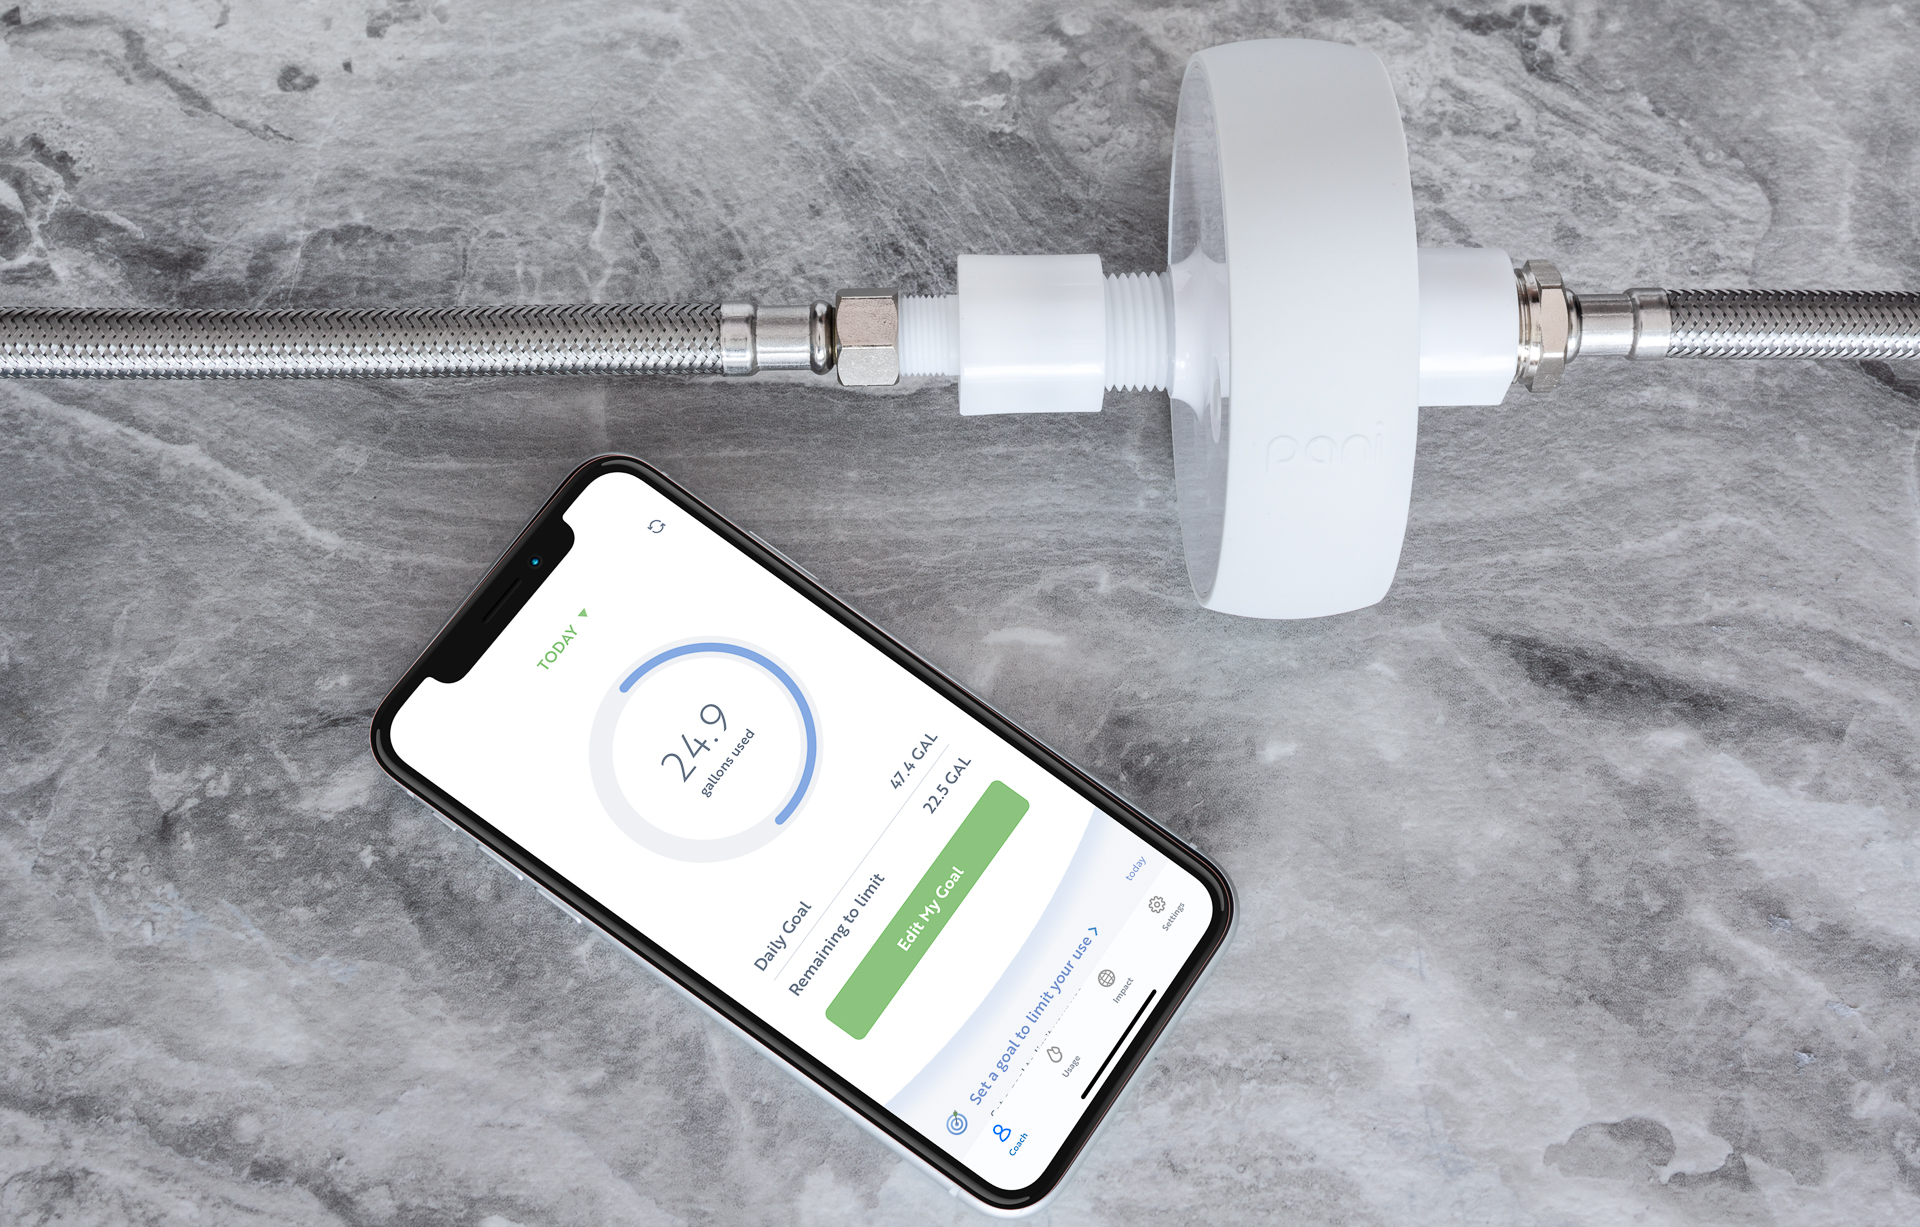 Smart water devices like the Pani Smart Water Monitor can significantly protect your home from leaks.  Image: Digitized house media.